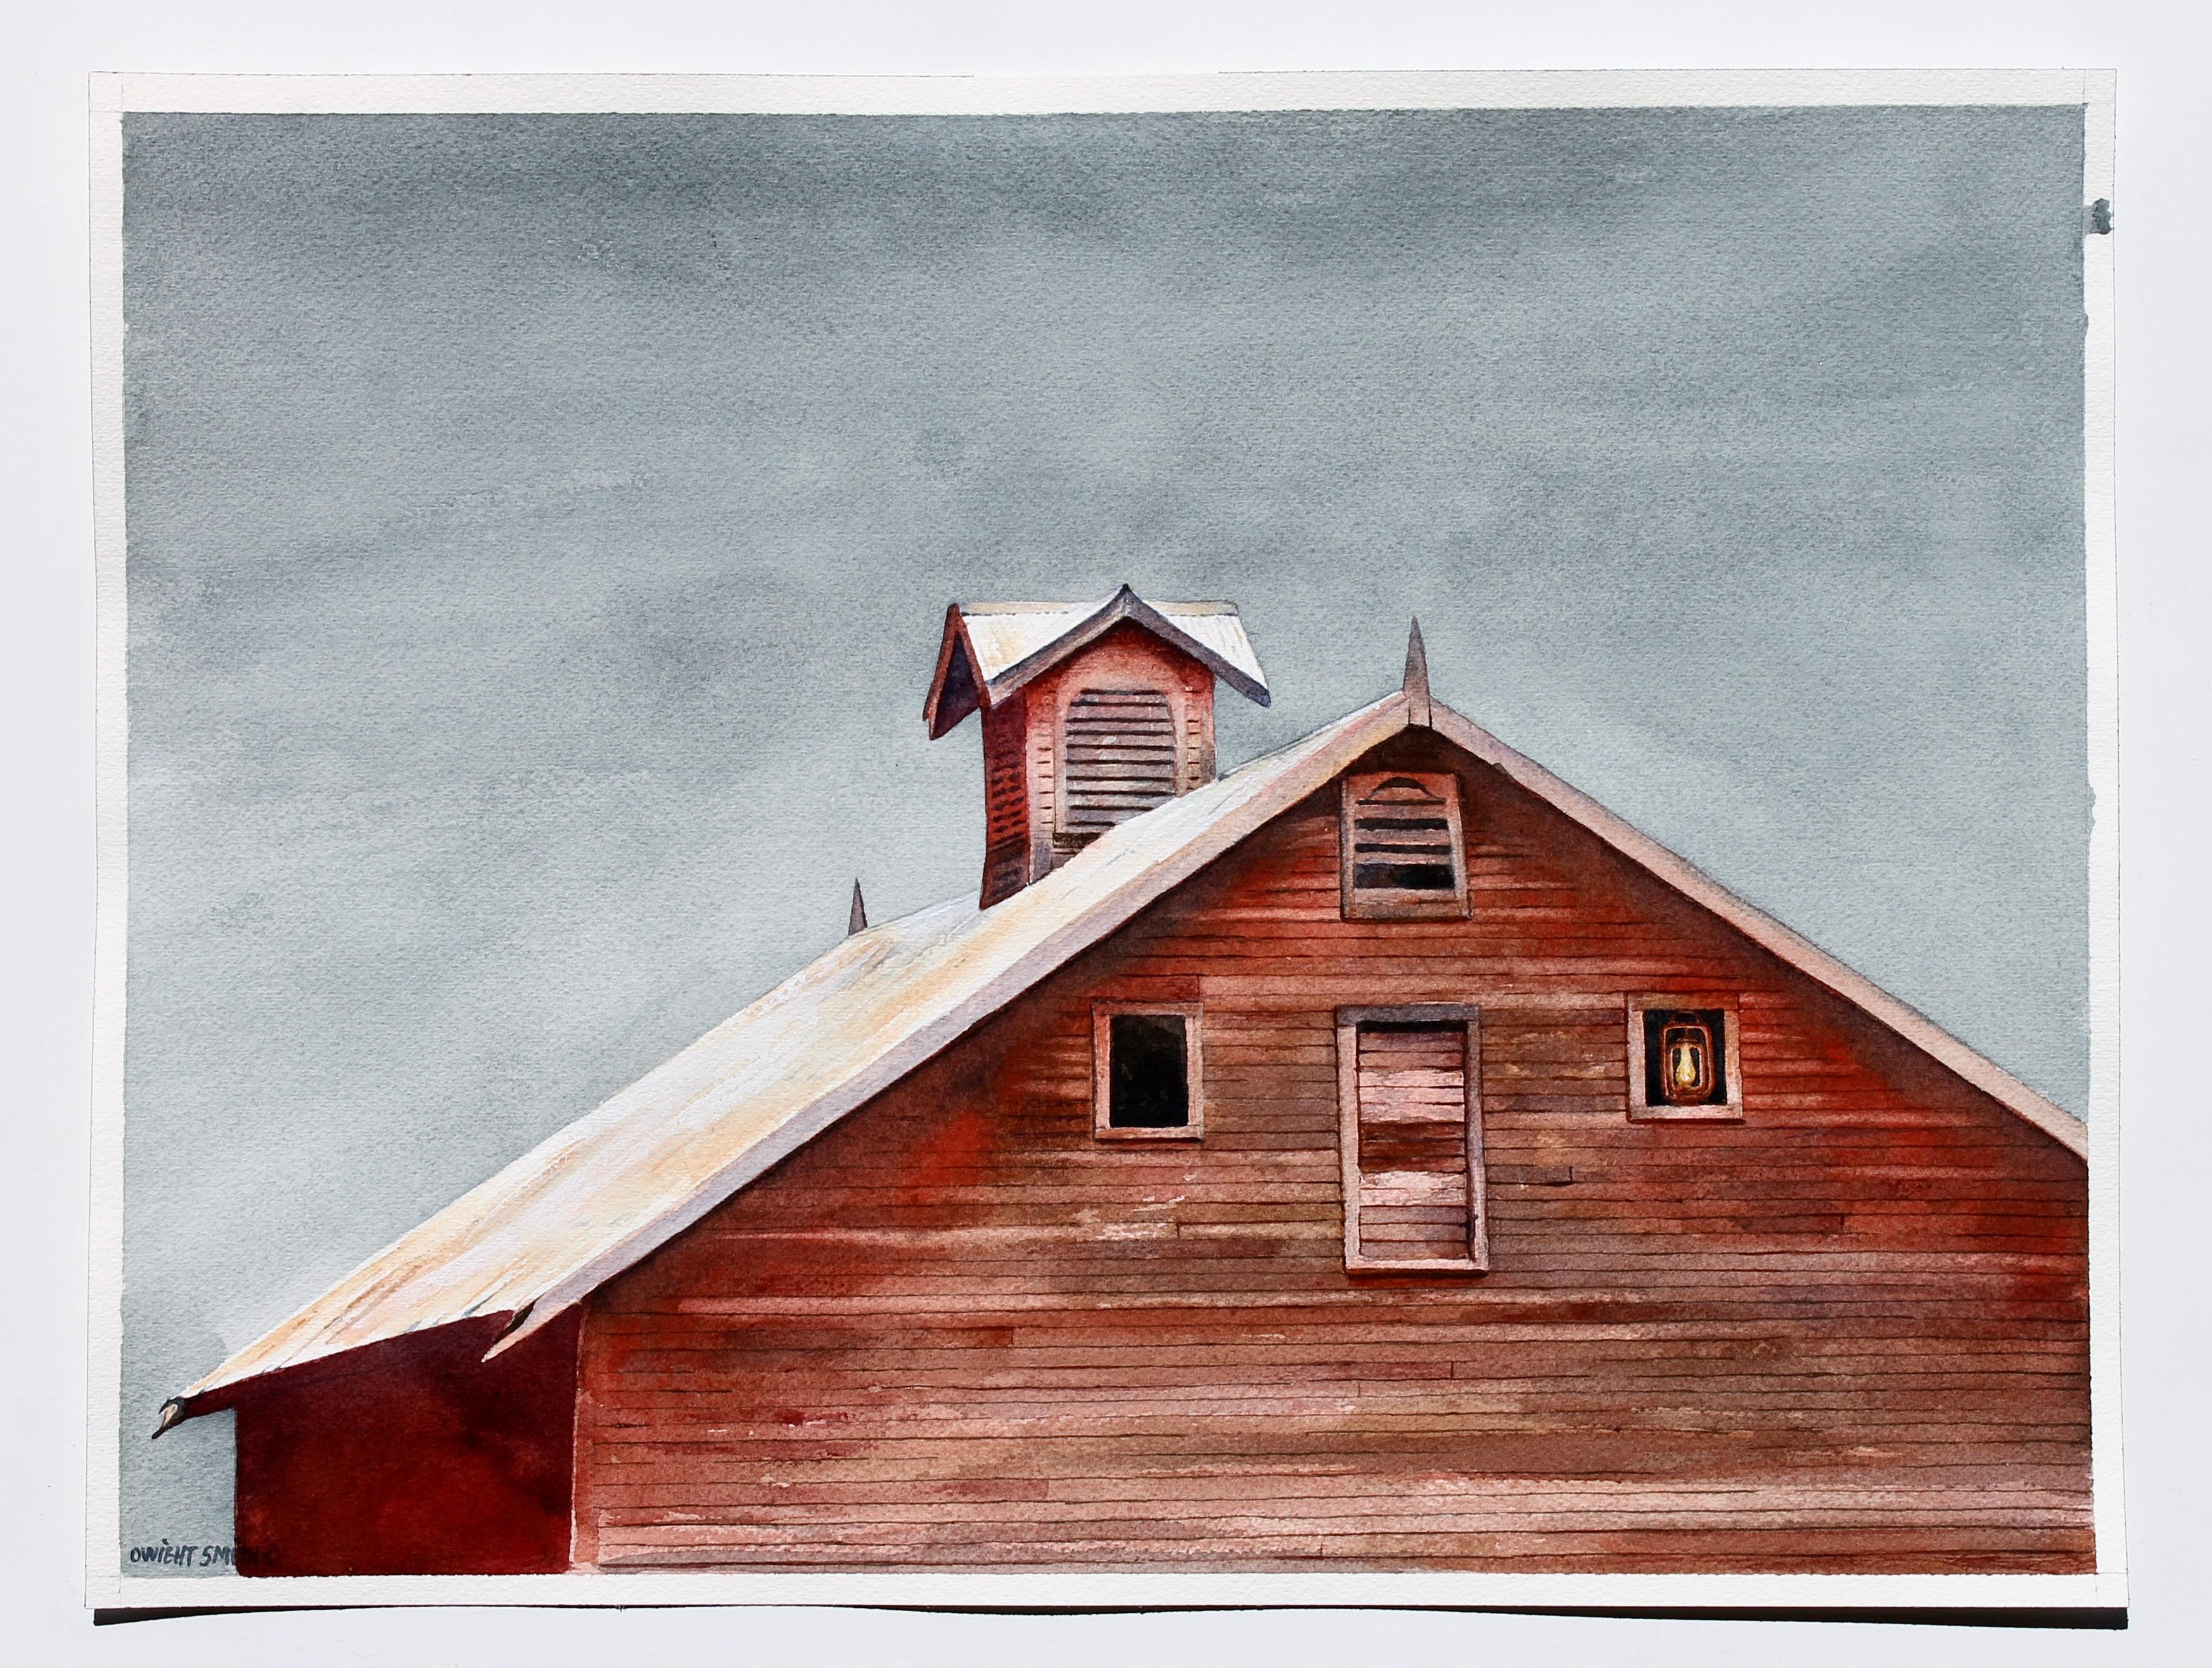 <p>Artist Comments<br>Barns stand as a sanctuary for many farms across America. In this painting, a lit lantern in a high window of the structure acts as a guiding light under the gray sky. It symbolizes a beacon of hope for the prodigal son's